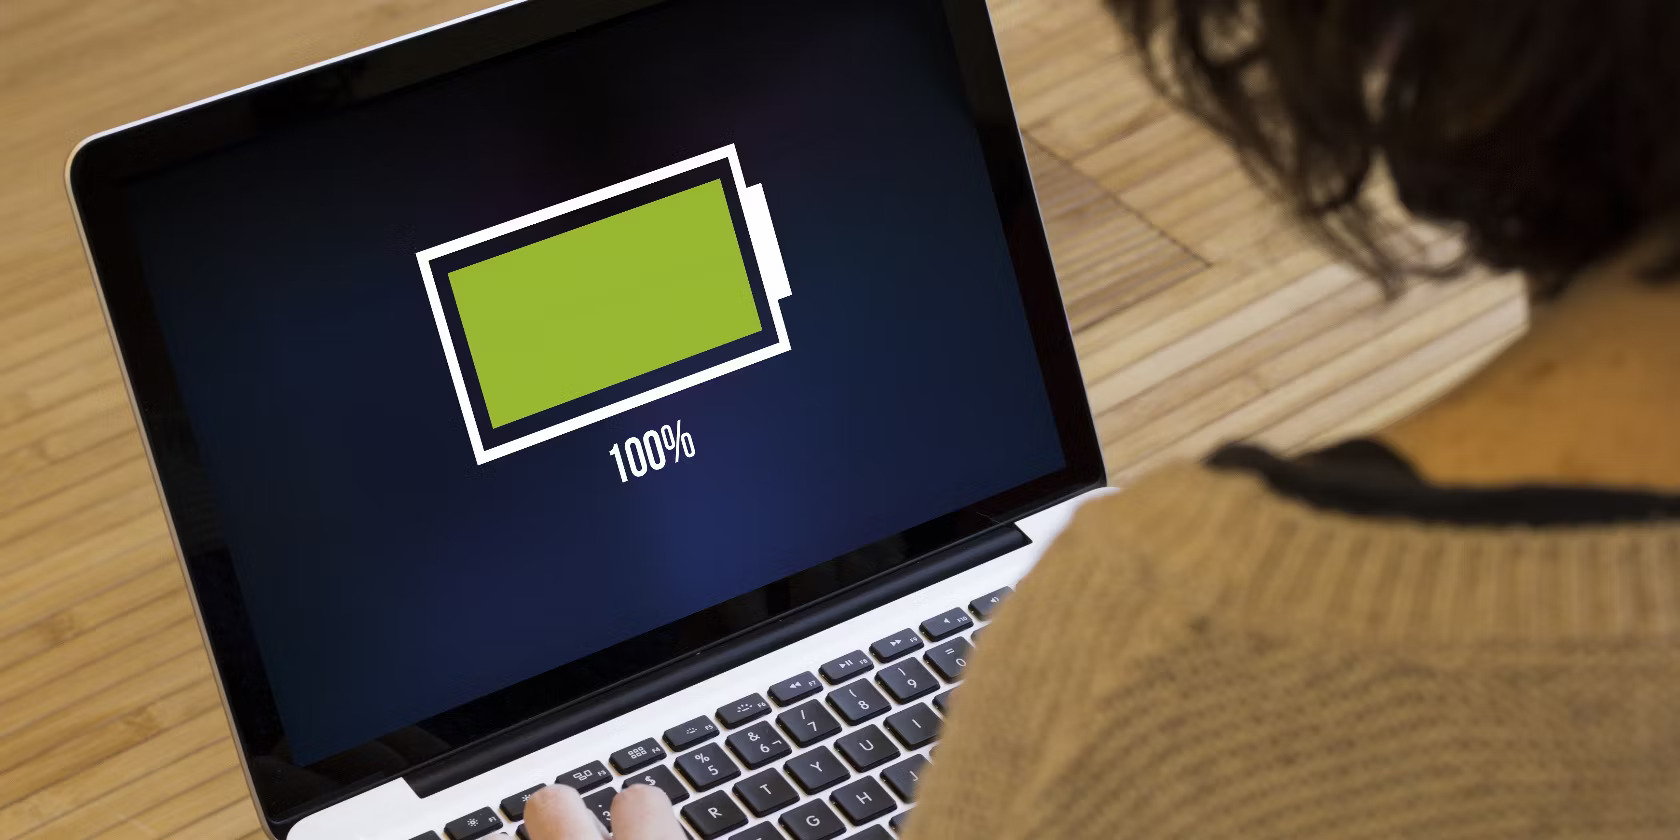 What Happens If A Laptop Battery Is Overcharged?